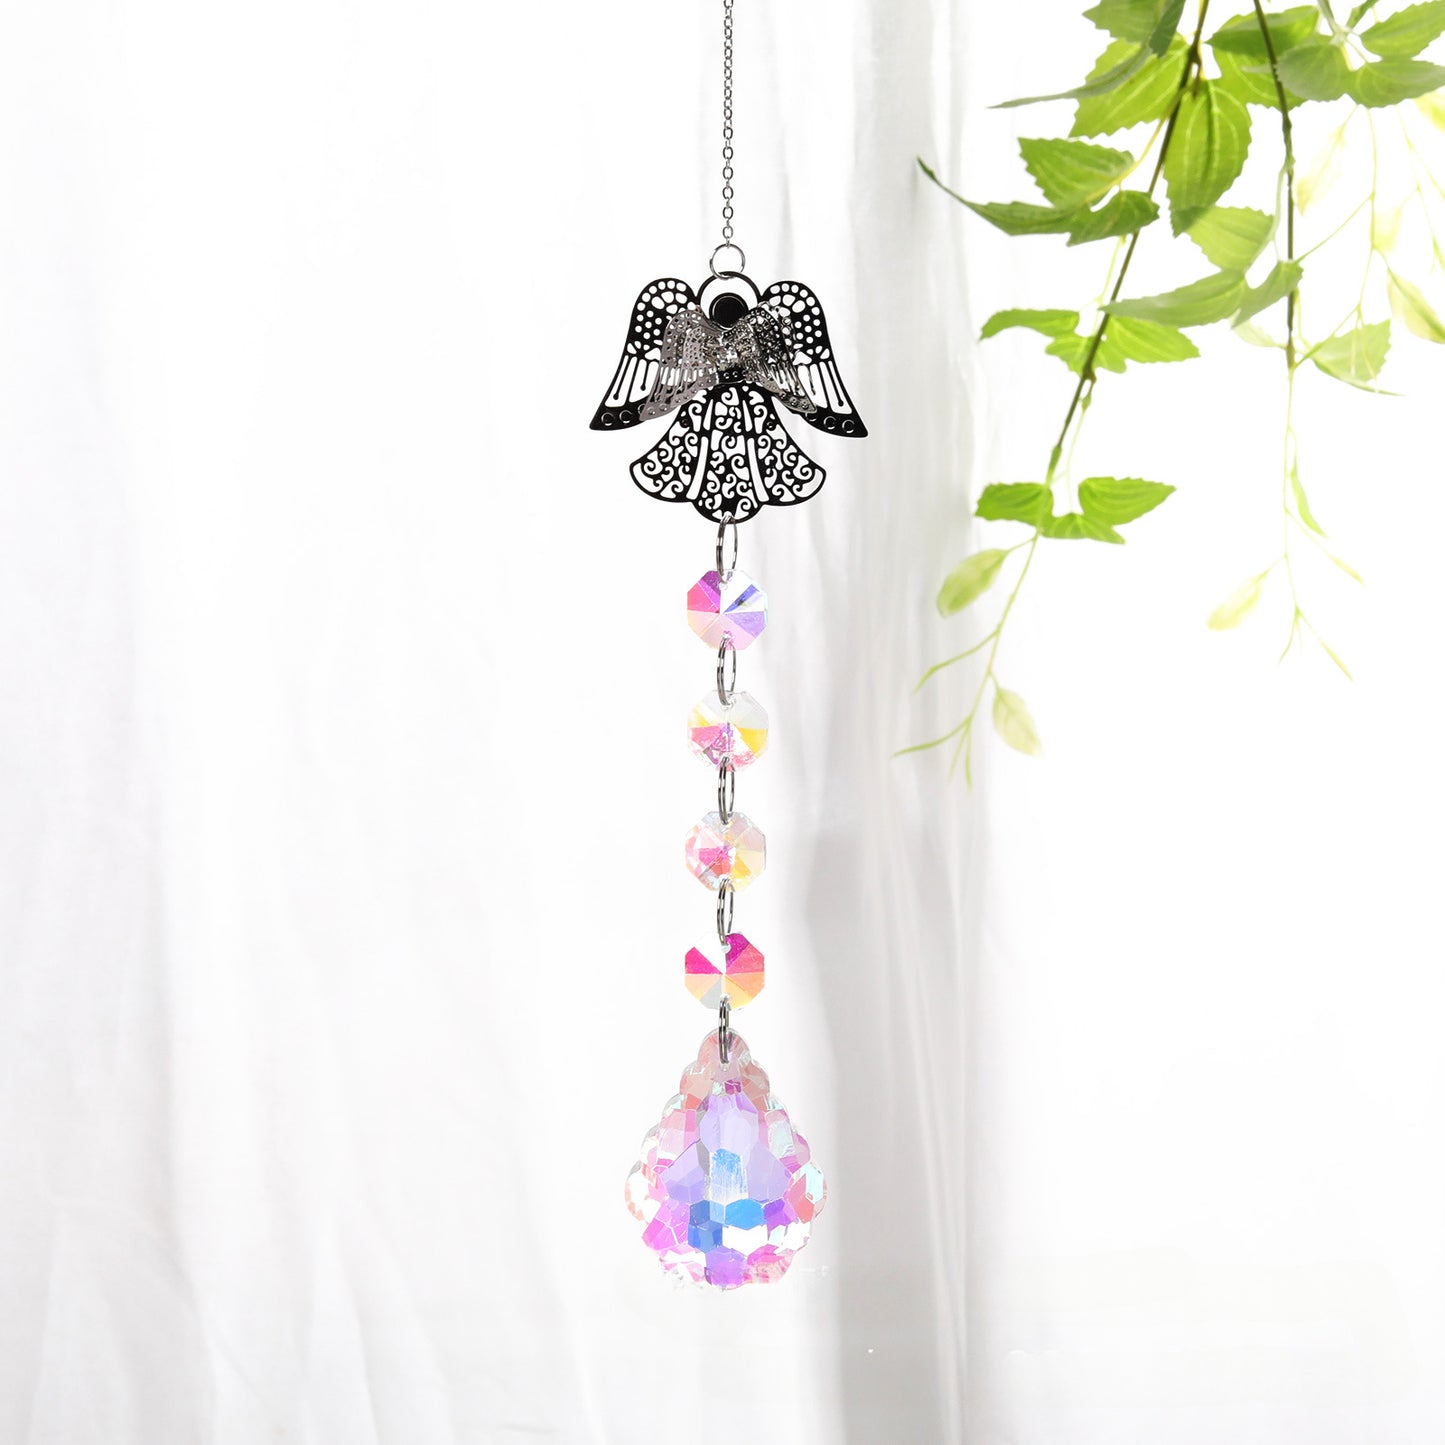 Life Tree Angel Dragonfly Butterfly Octagonal Pearl AB Color Crystal Pendant Garden Horticultural Pendant Sunshine Reflection